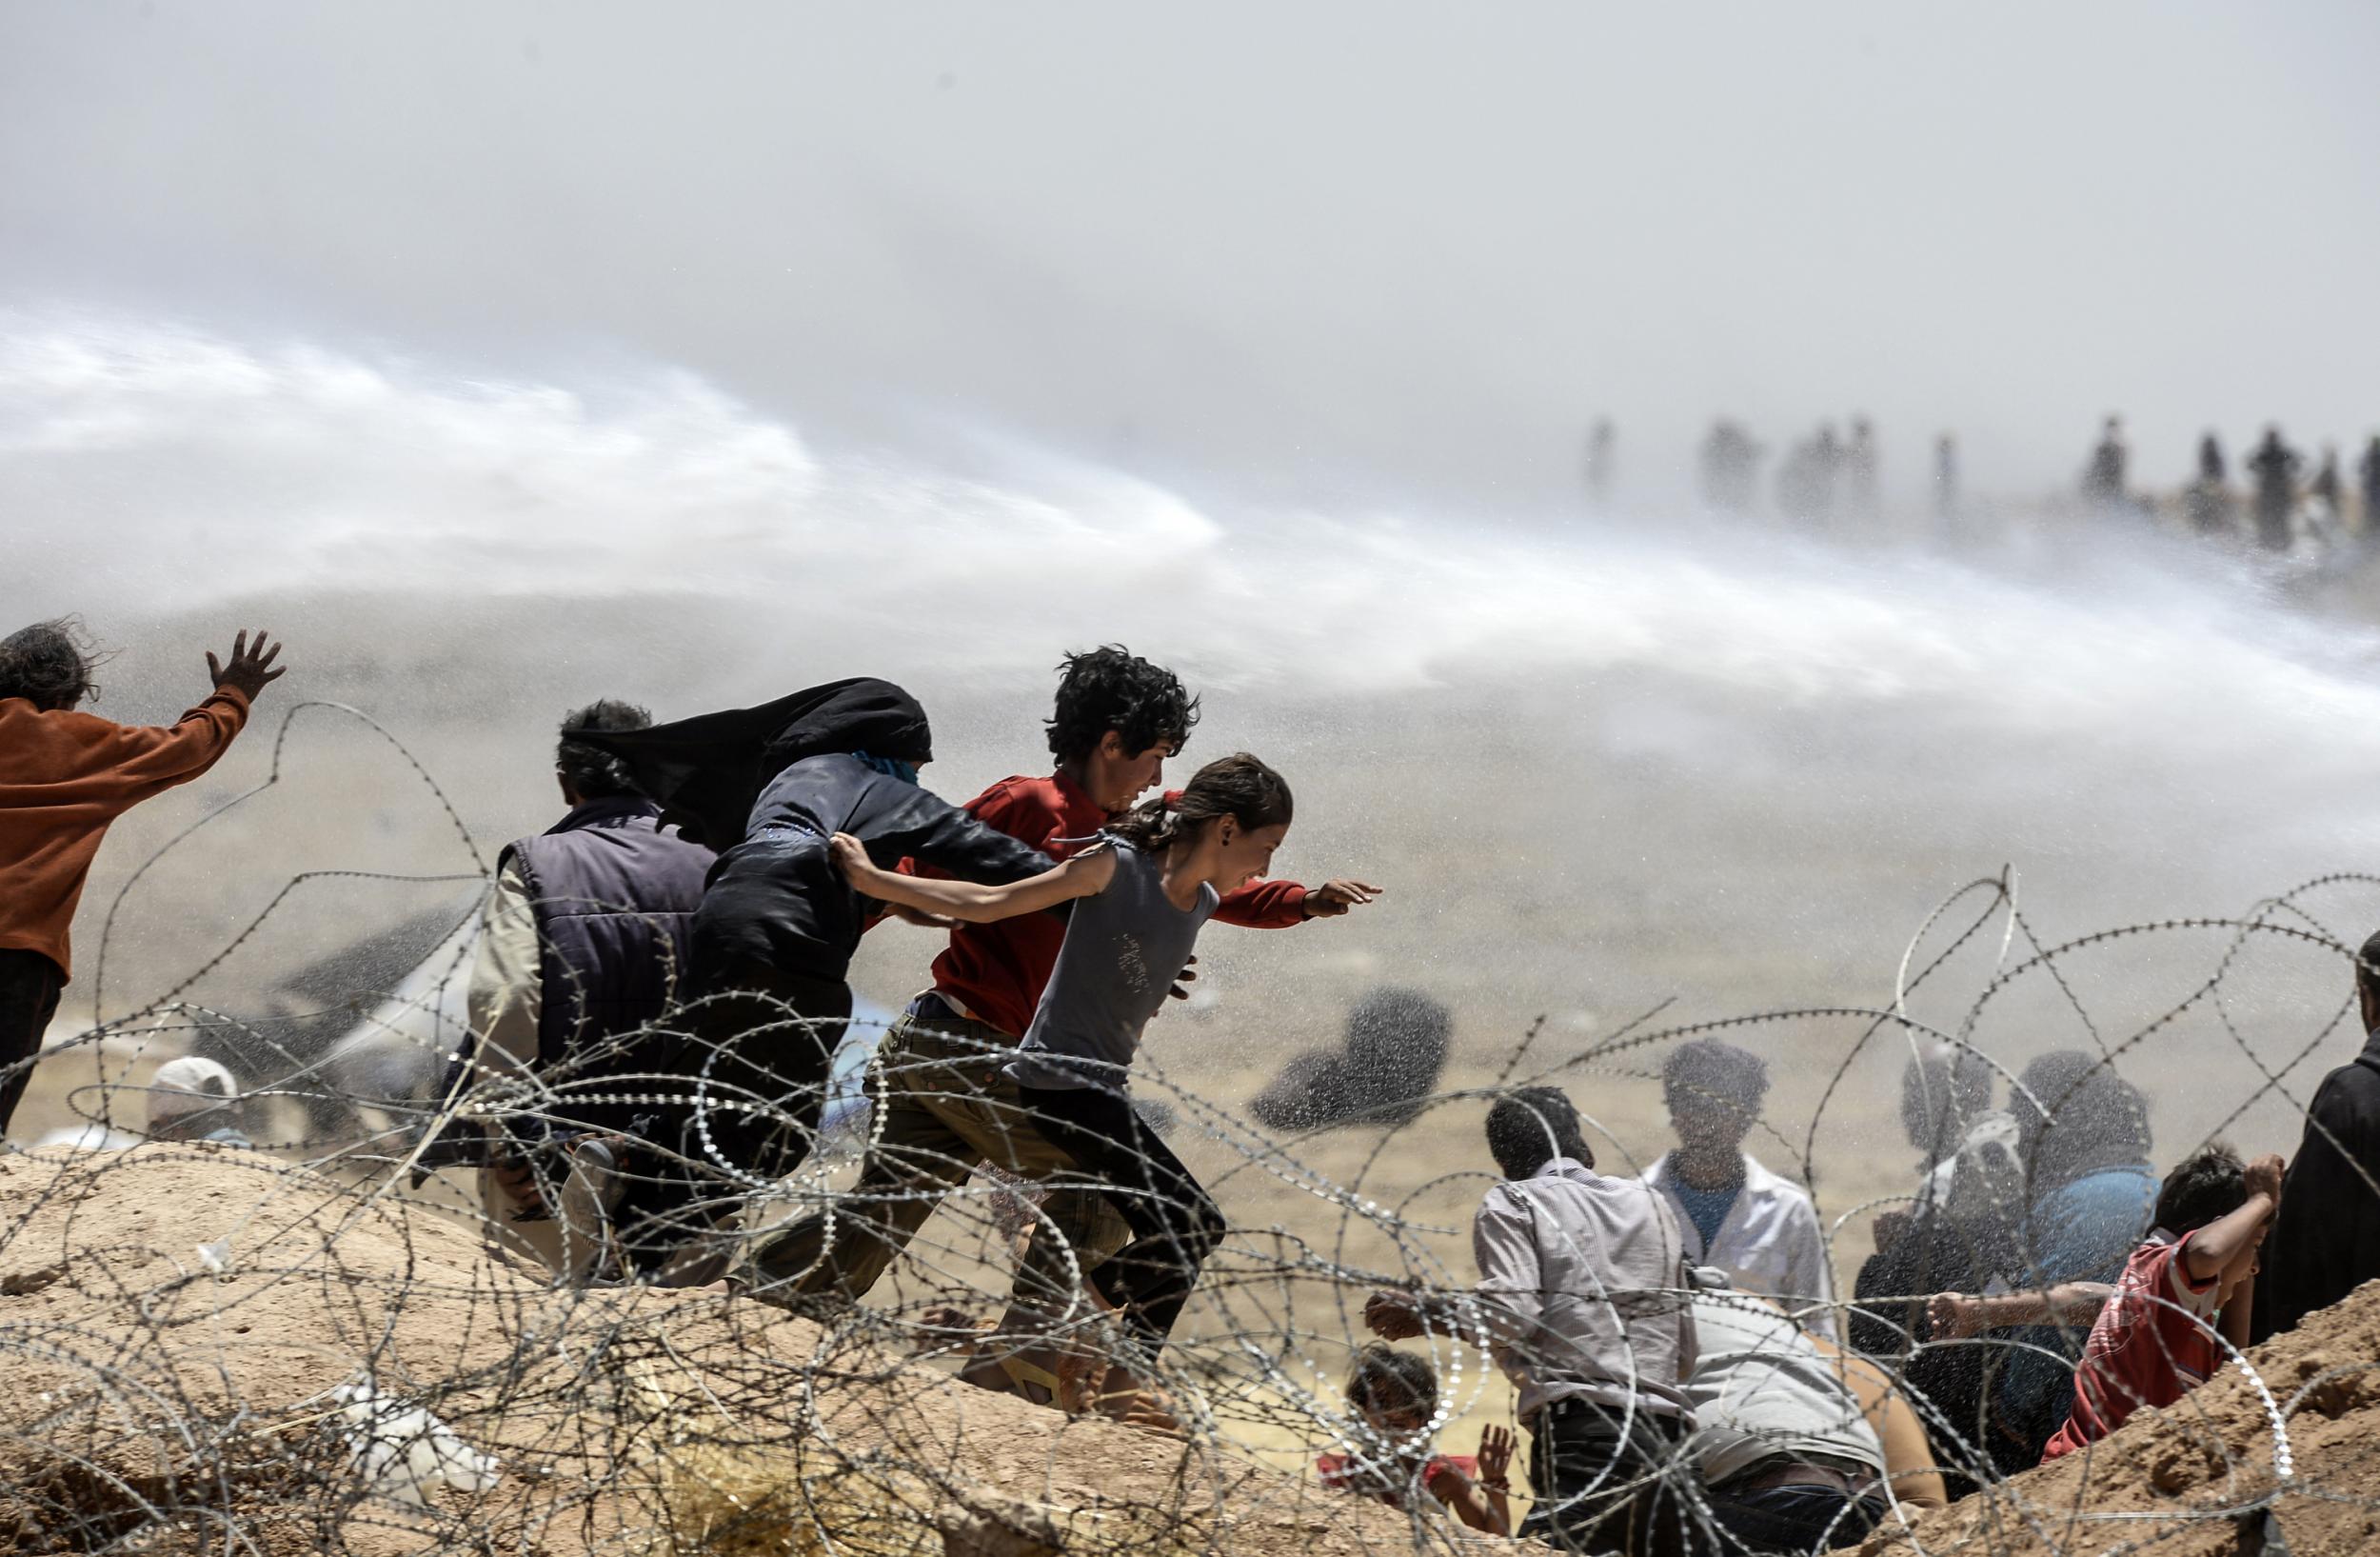 Syrian refugees run away as Turkish soldiers use water cannon to move them away from fences at the Turkish border near the Syrian town of Tal Abyad, at Akcakale in Sanliurfa province, on June 13, 2015